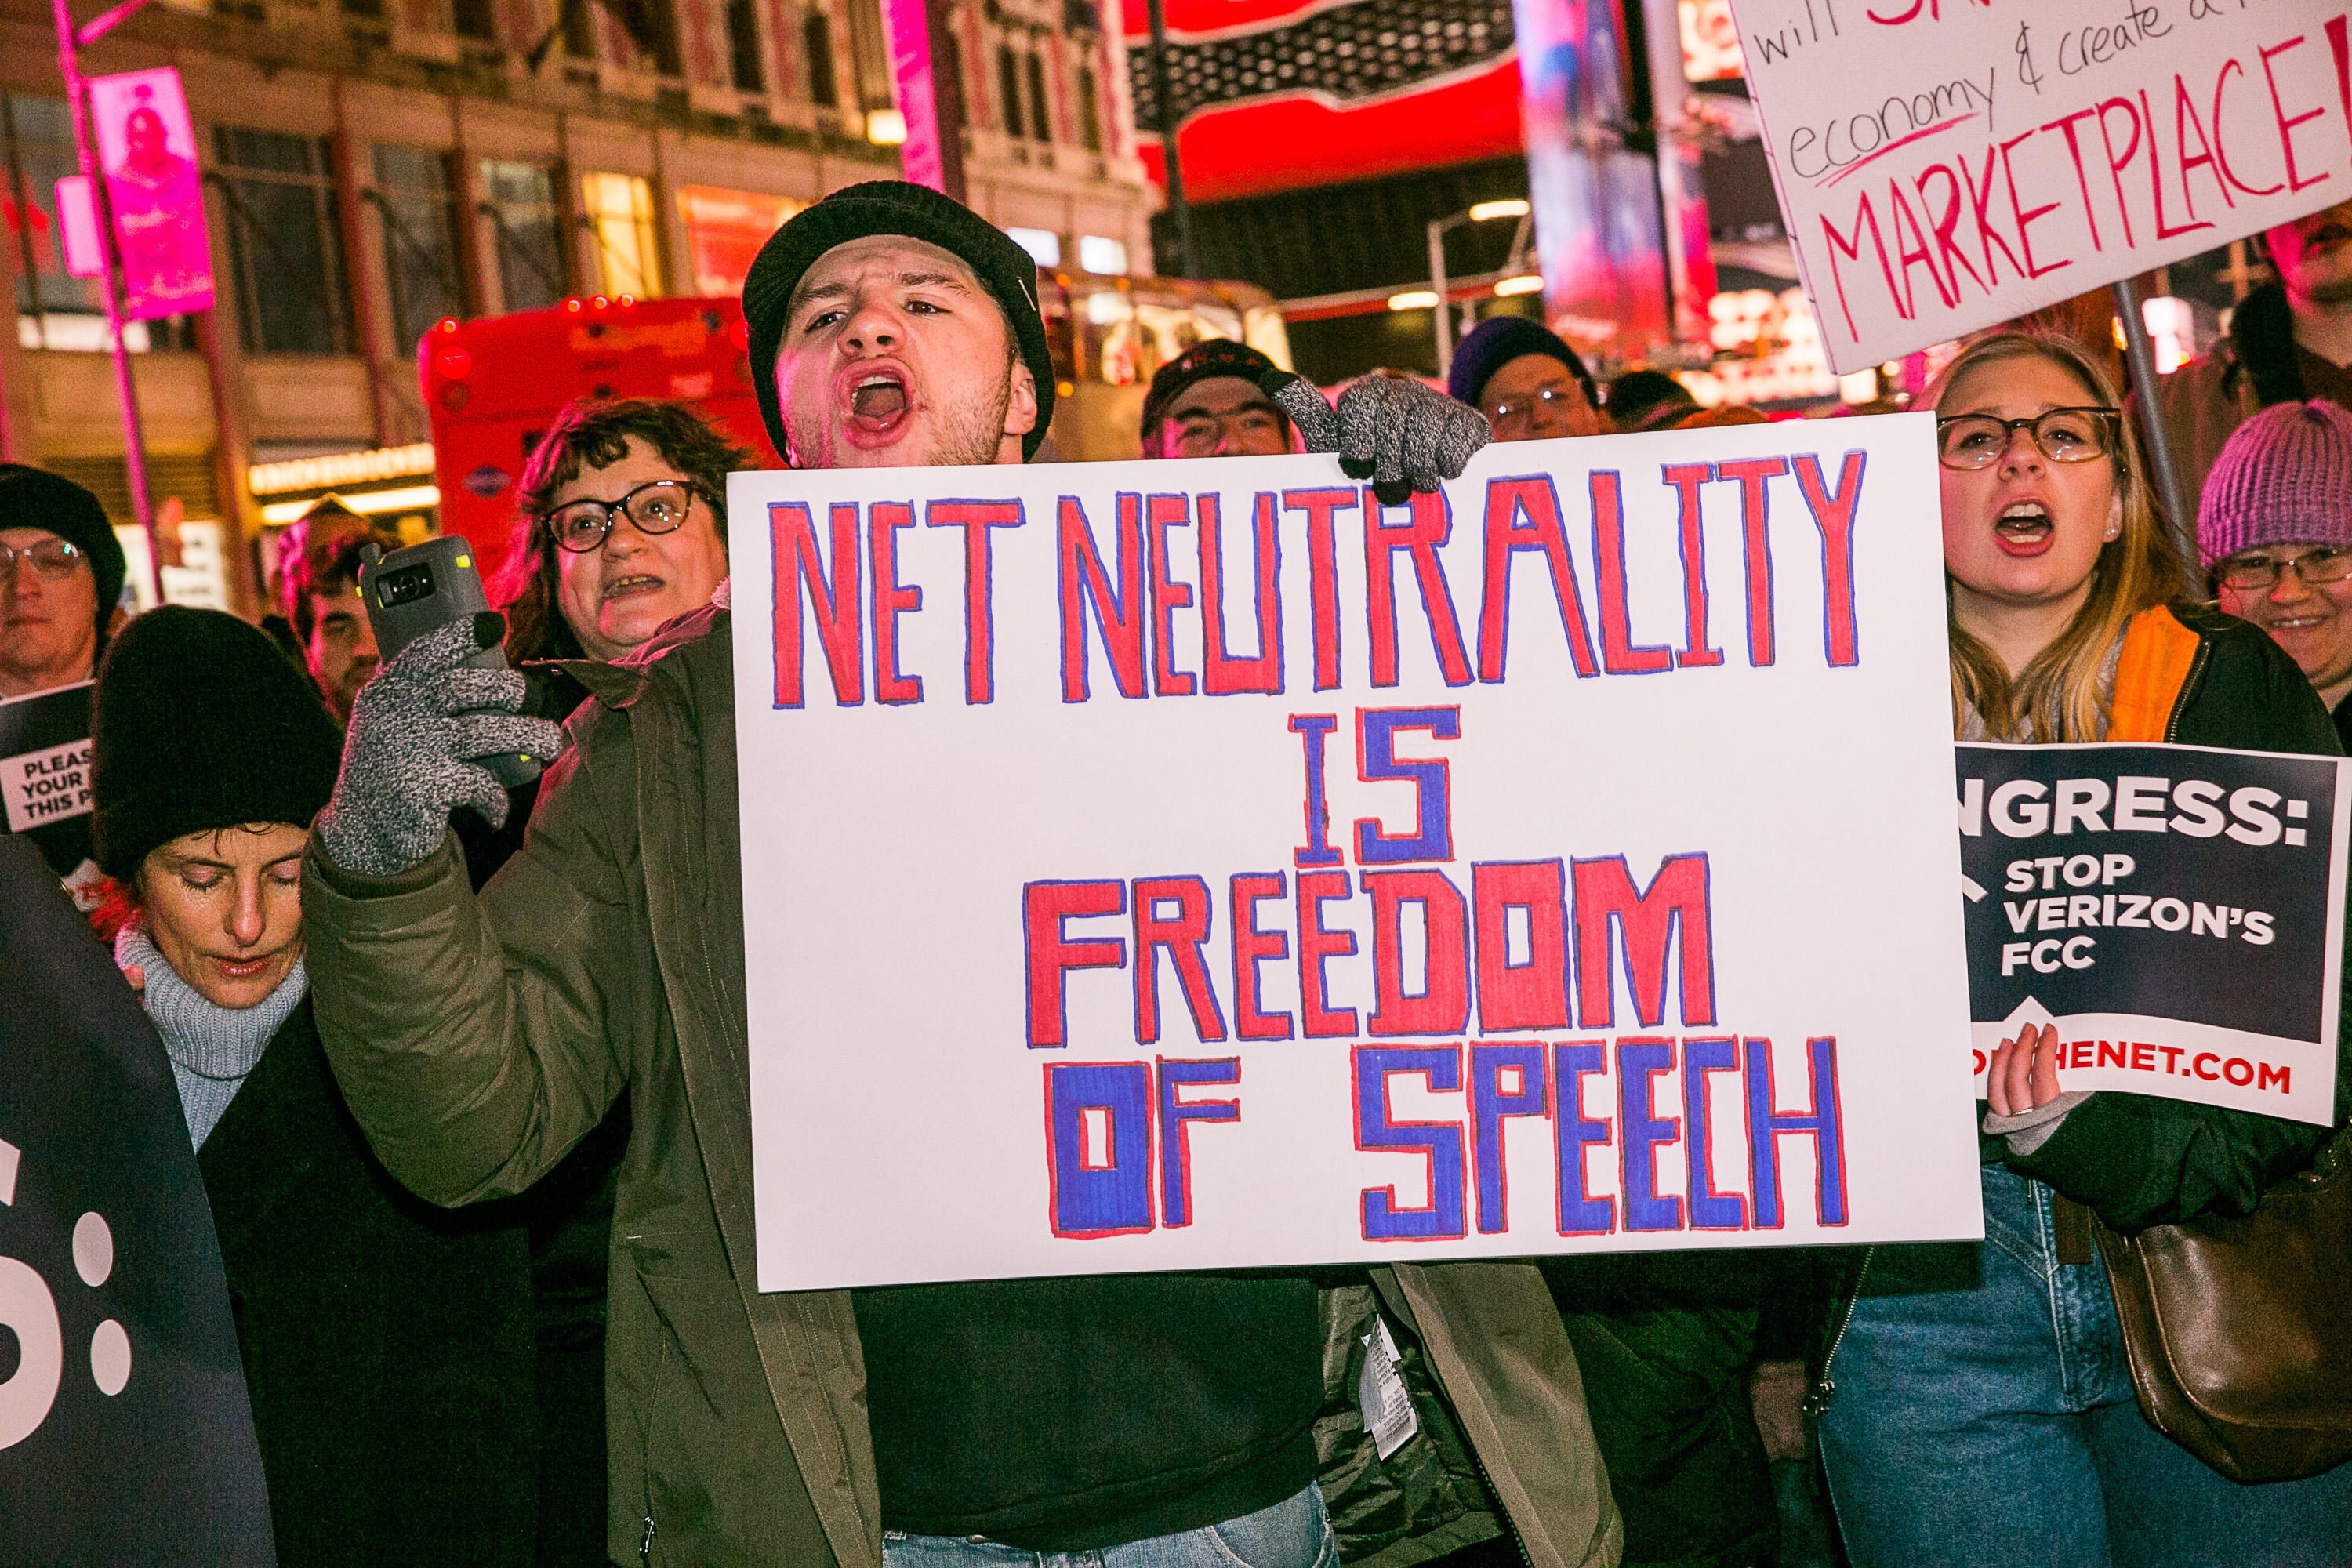 More states are now considering net neutrality rules